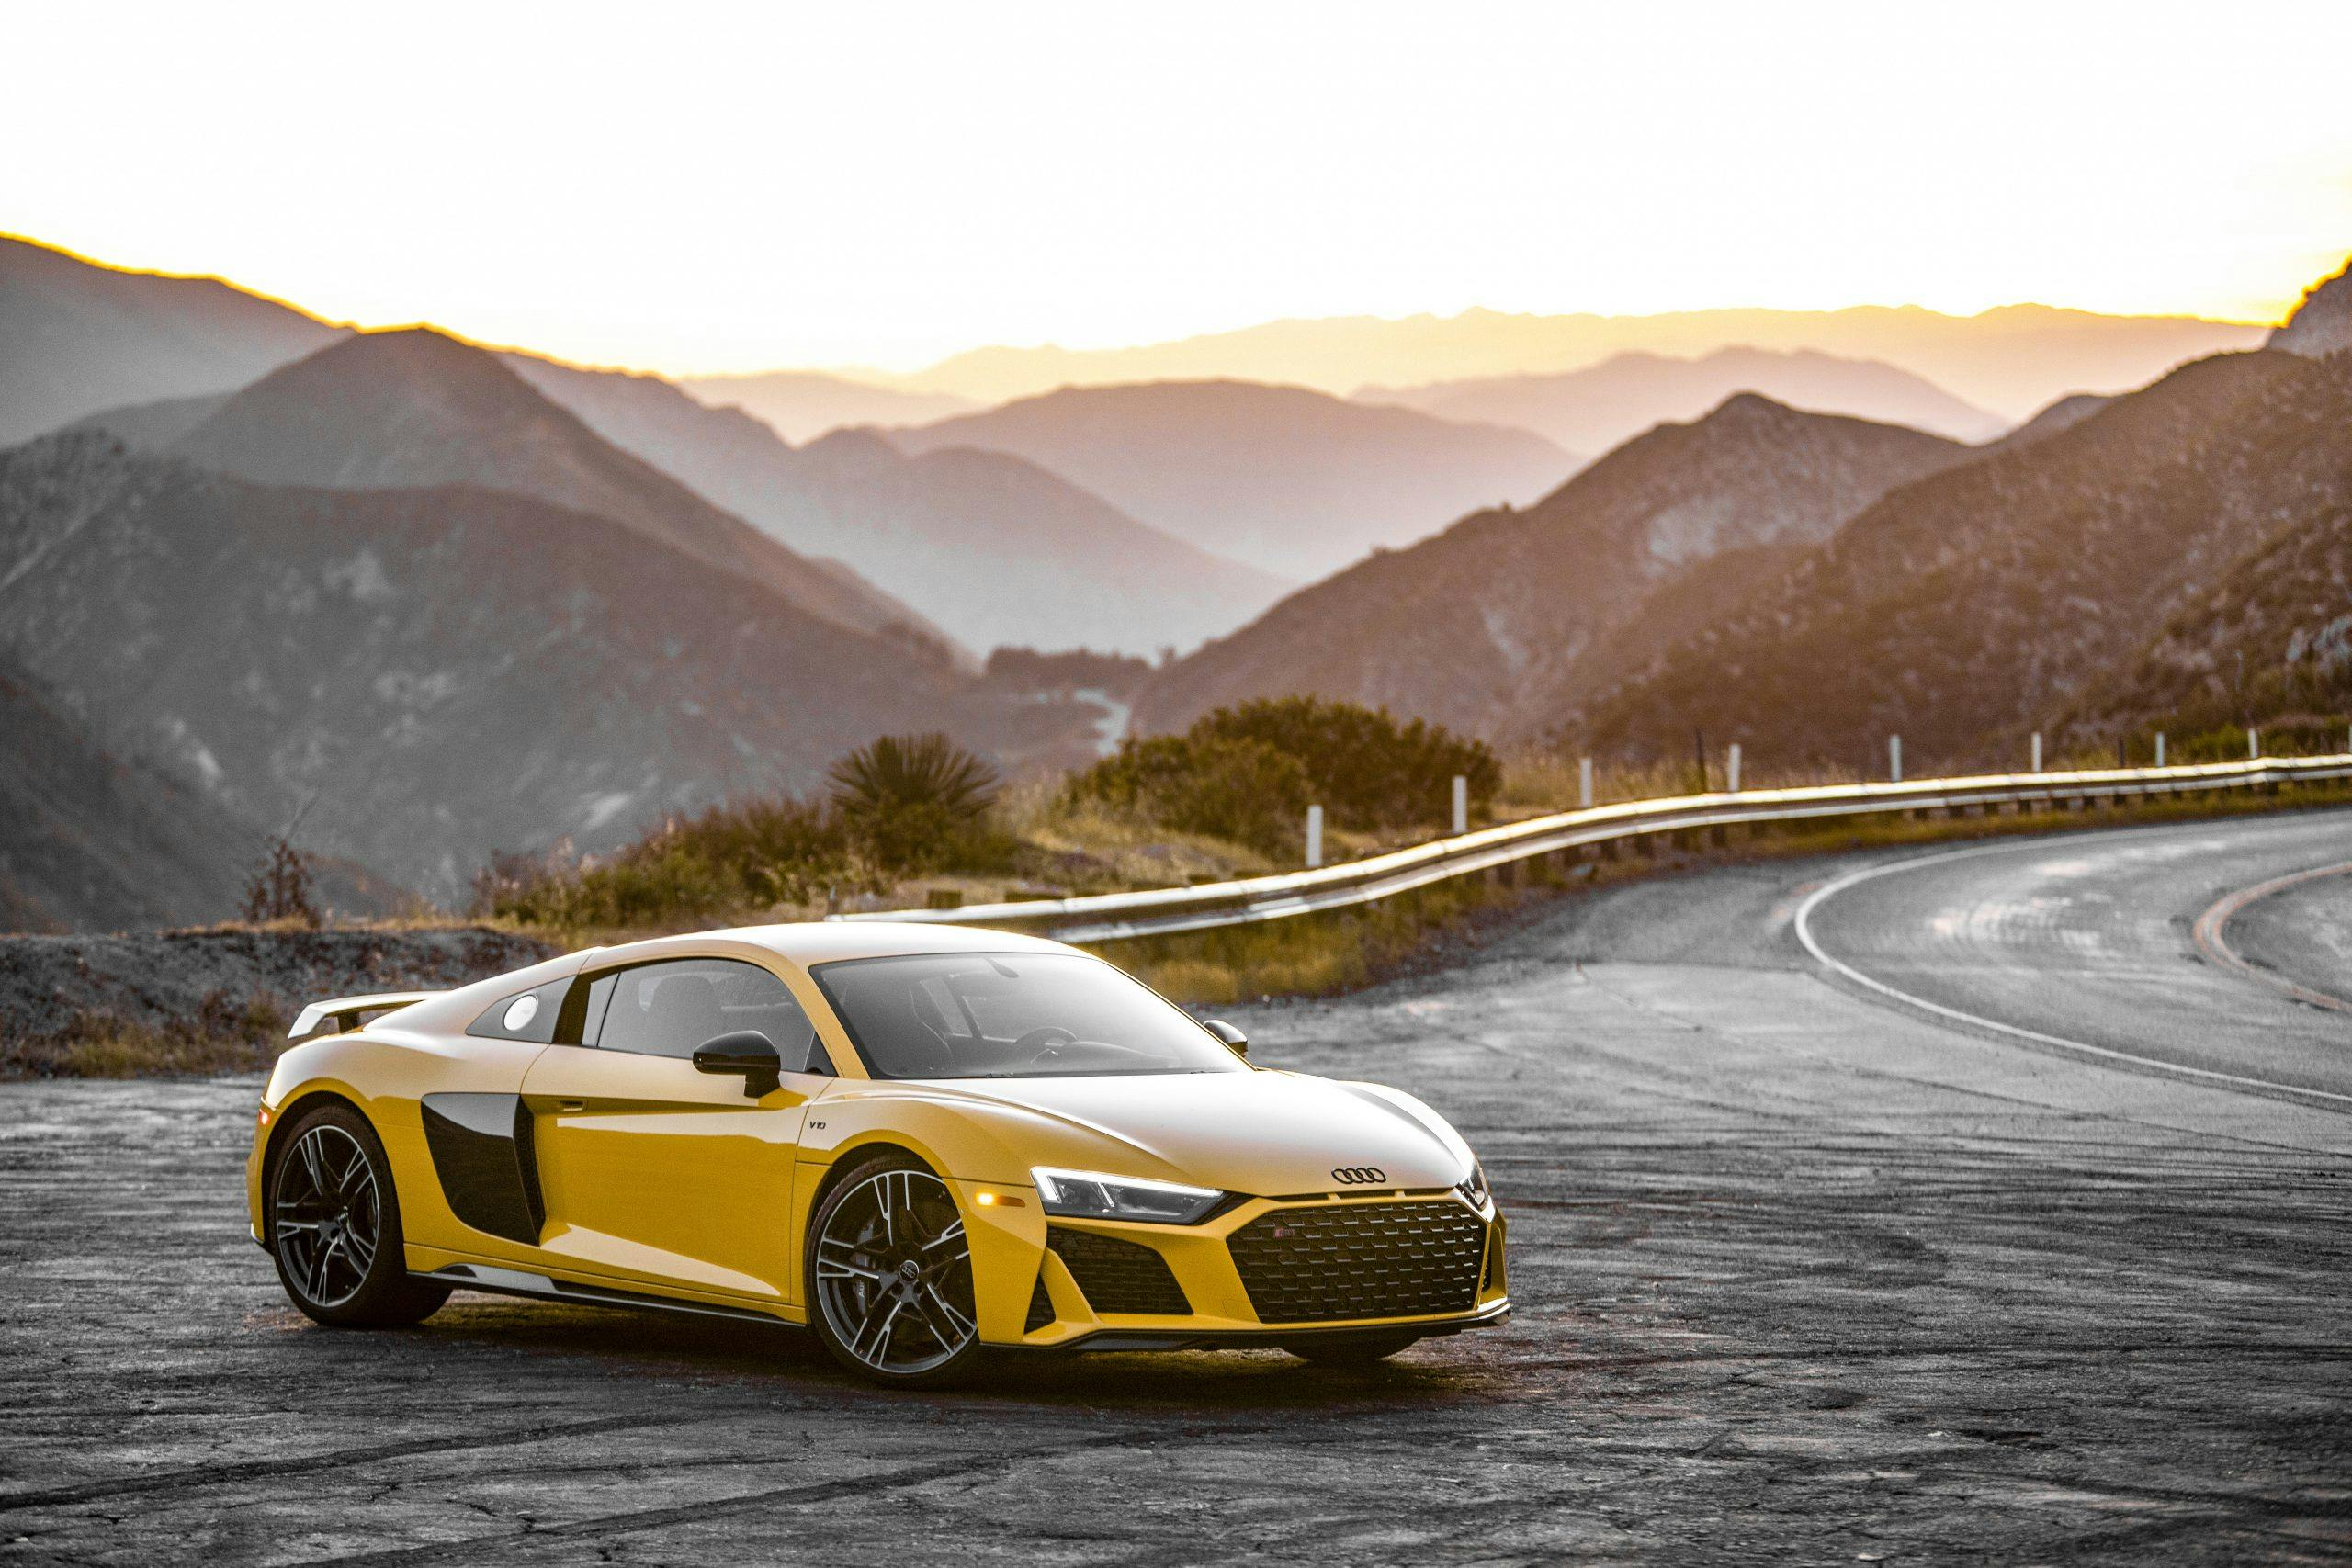 https://hagerty-media-prod.imgix.net/2020/05/2020-Audi-R8-front-three-quarter-Angeles-Crest-Highway-scaled.jpg?auto=format%2Ccompress&ixlib=php-3.3.0